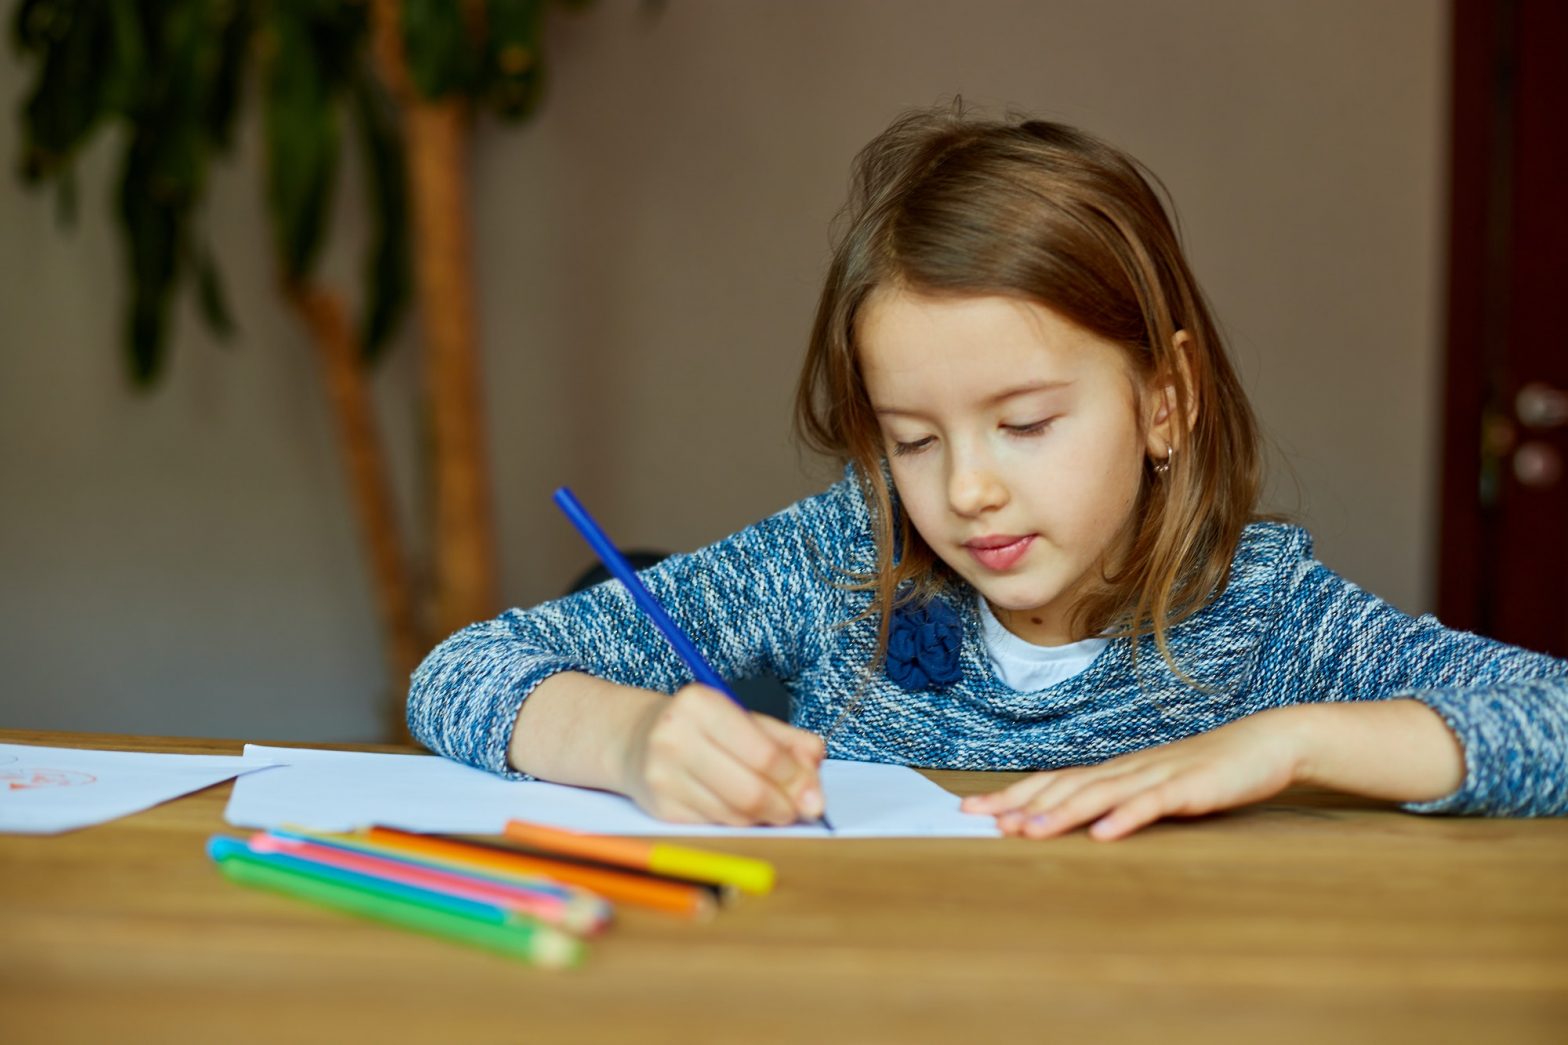 School girl drawing and writing a picture with crayons, using colored pencils